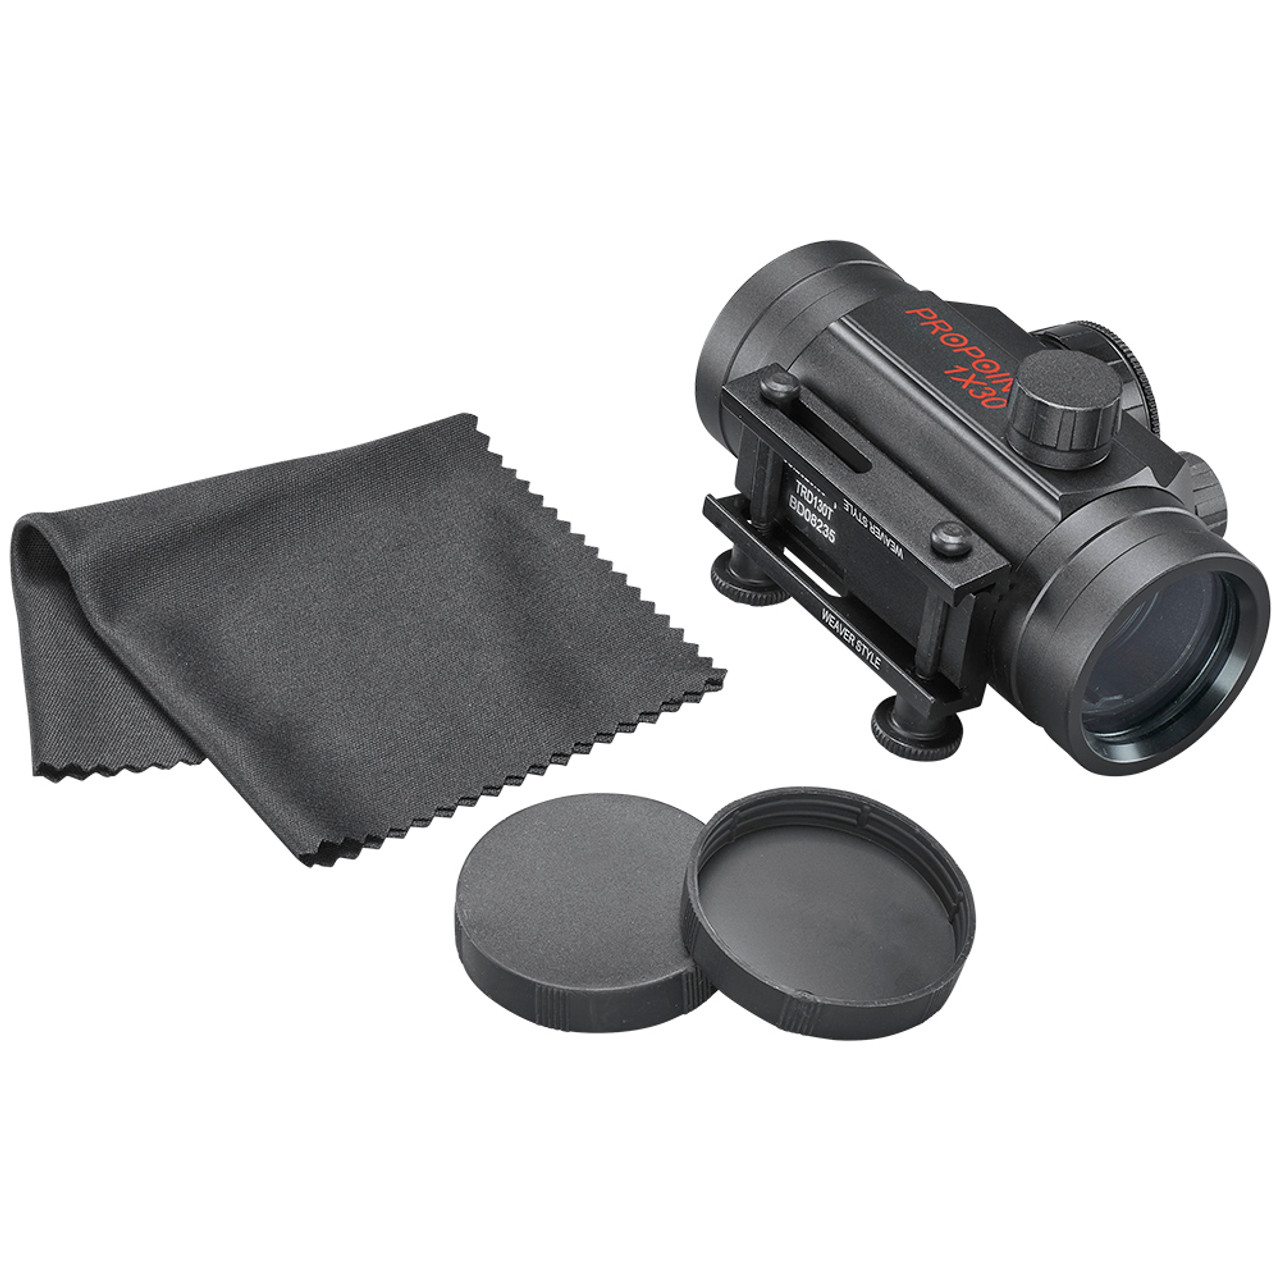 ProPointÂ 1x30mm Fixed Red DotÂ Sight | Tasco¨ Outdoors